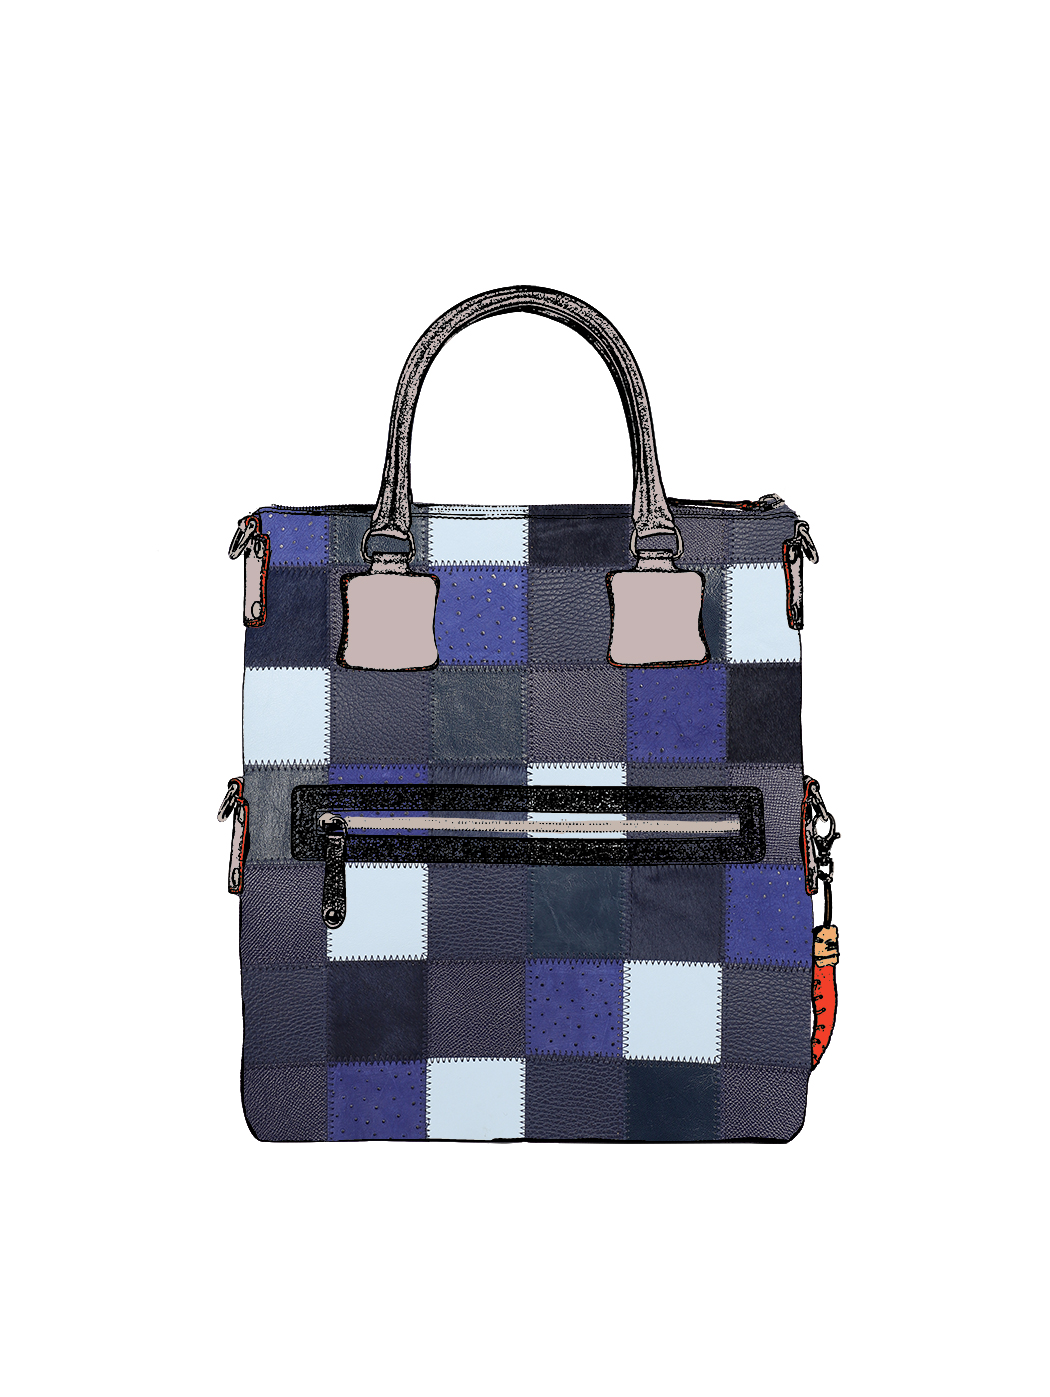 Large Tote Convertible Bag Navy blue - Fortunata Patchwork